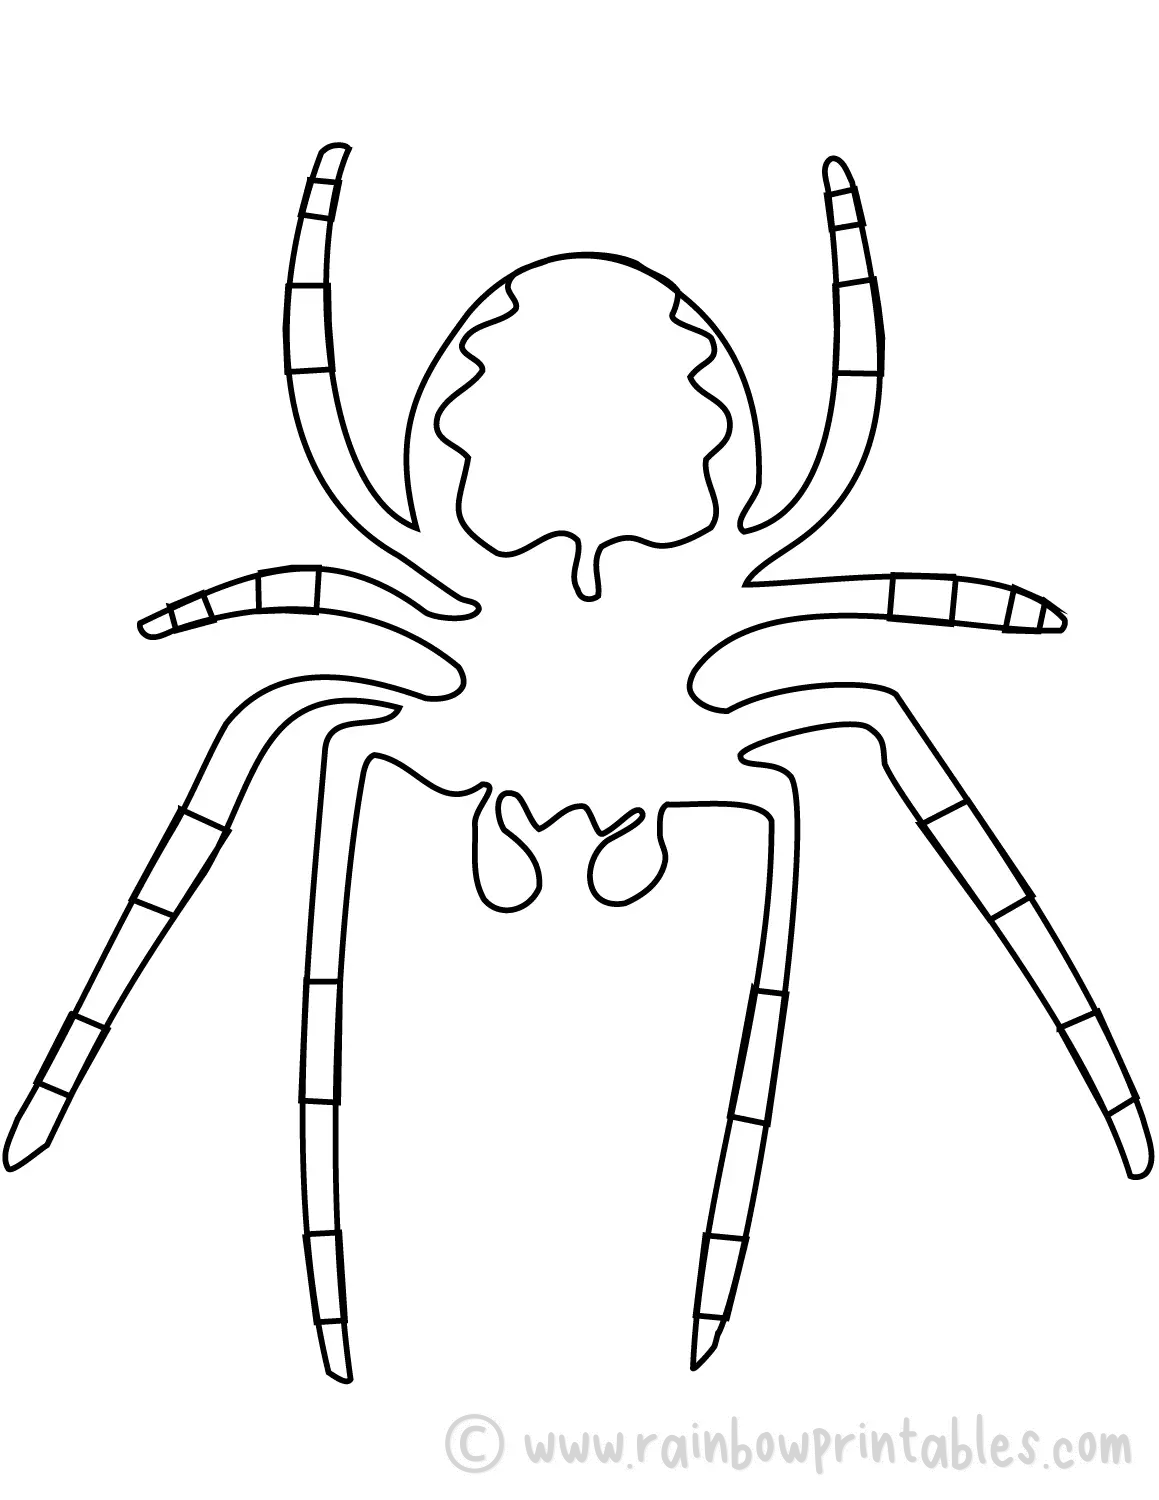 simple-SPIDER-coloring-page-insect-web-black-widow-for-kids